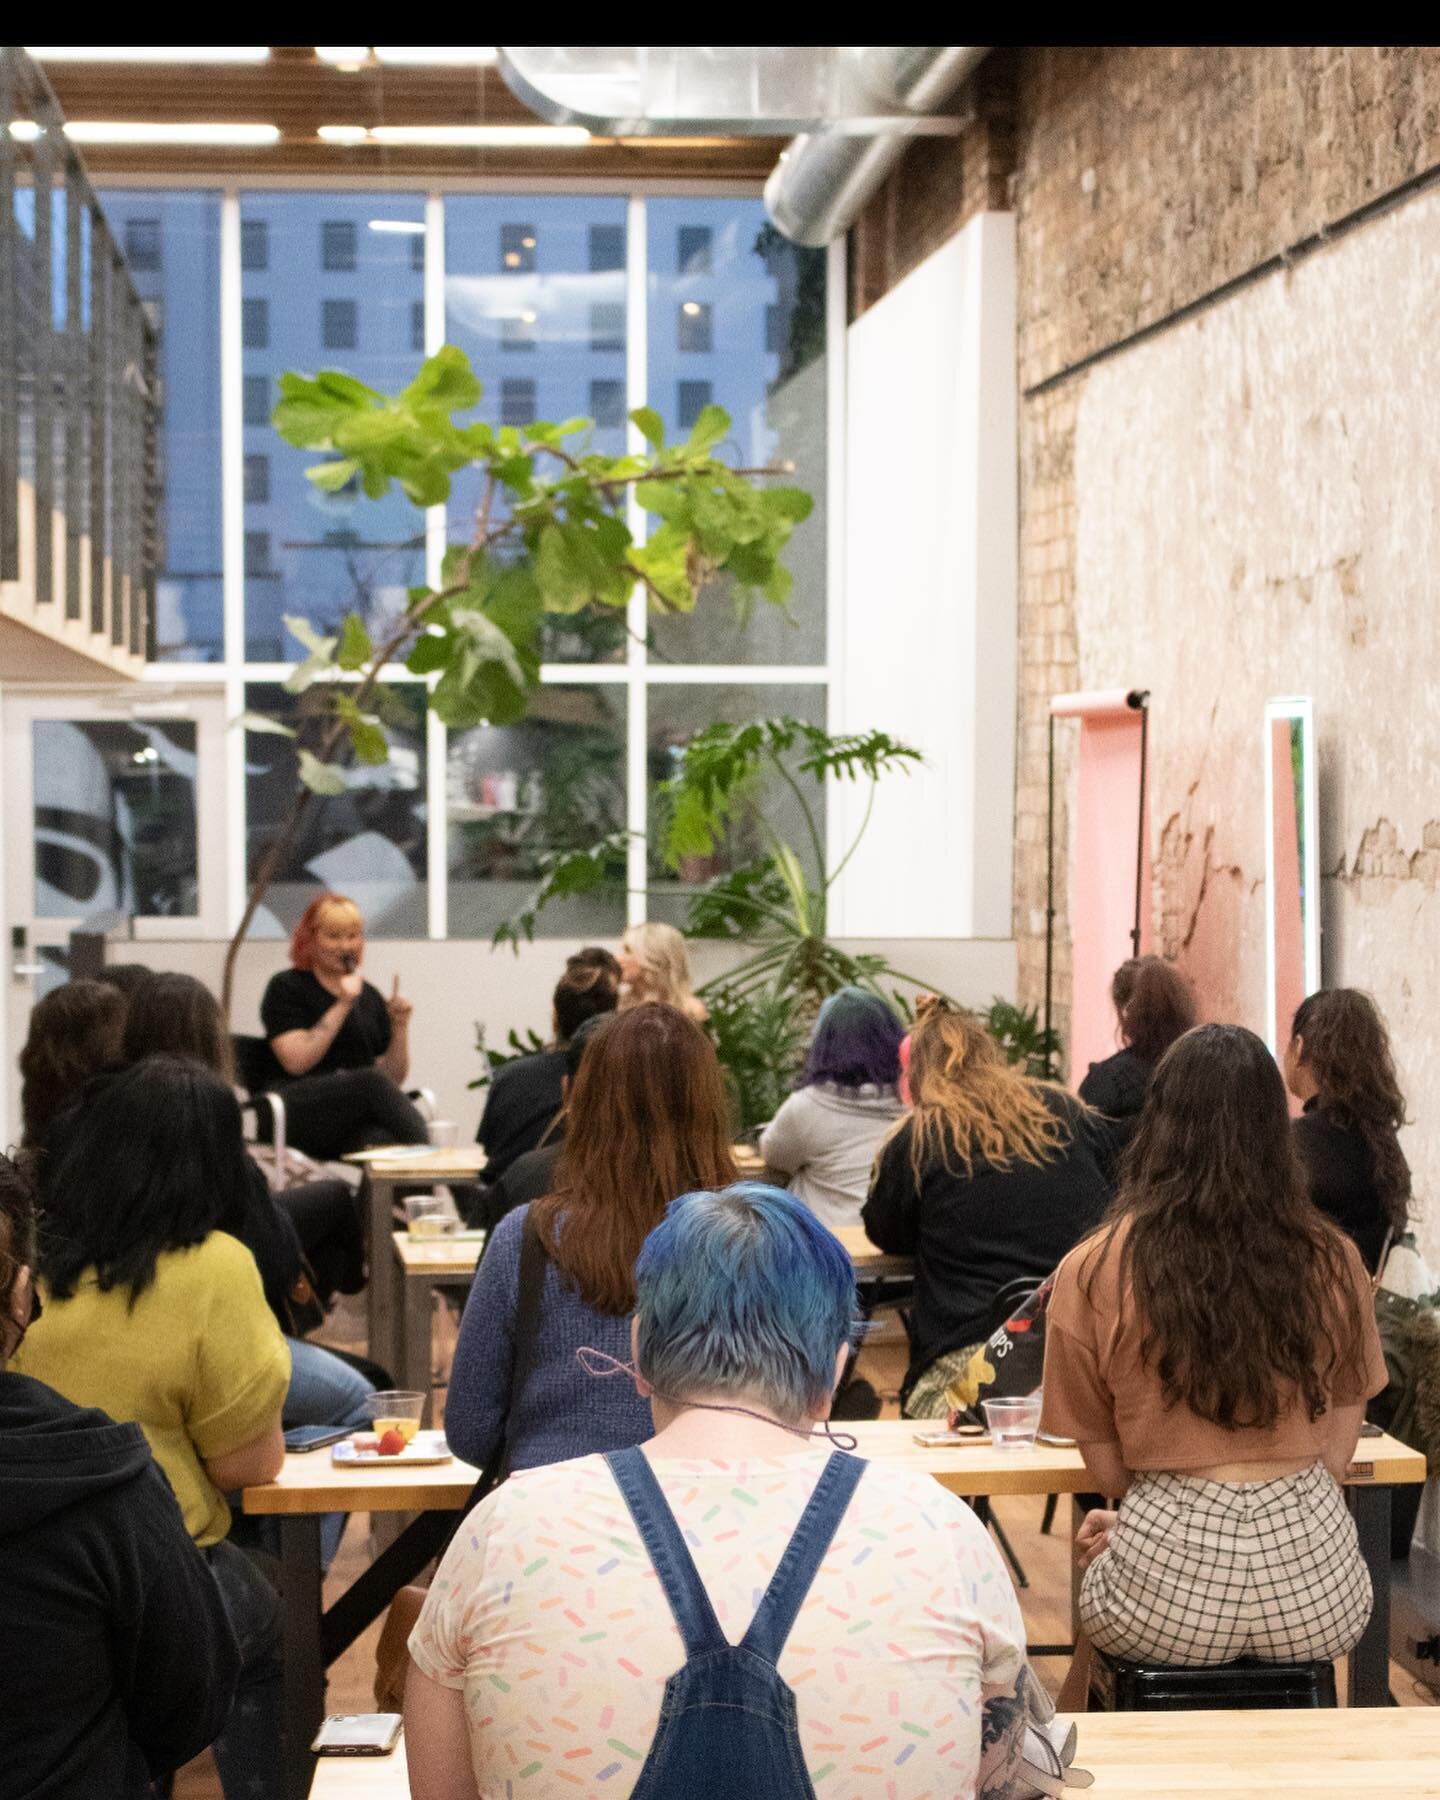 SWMUI's highest priority when searching for a new location was to establish an inviting, creative and collaborative workspace for all students and artists. 

Our gorgeous downtown spot not only sparks joy, but DEMANDS creativity (and glitter!). Get i